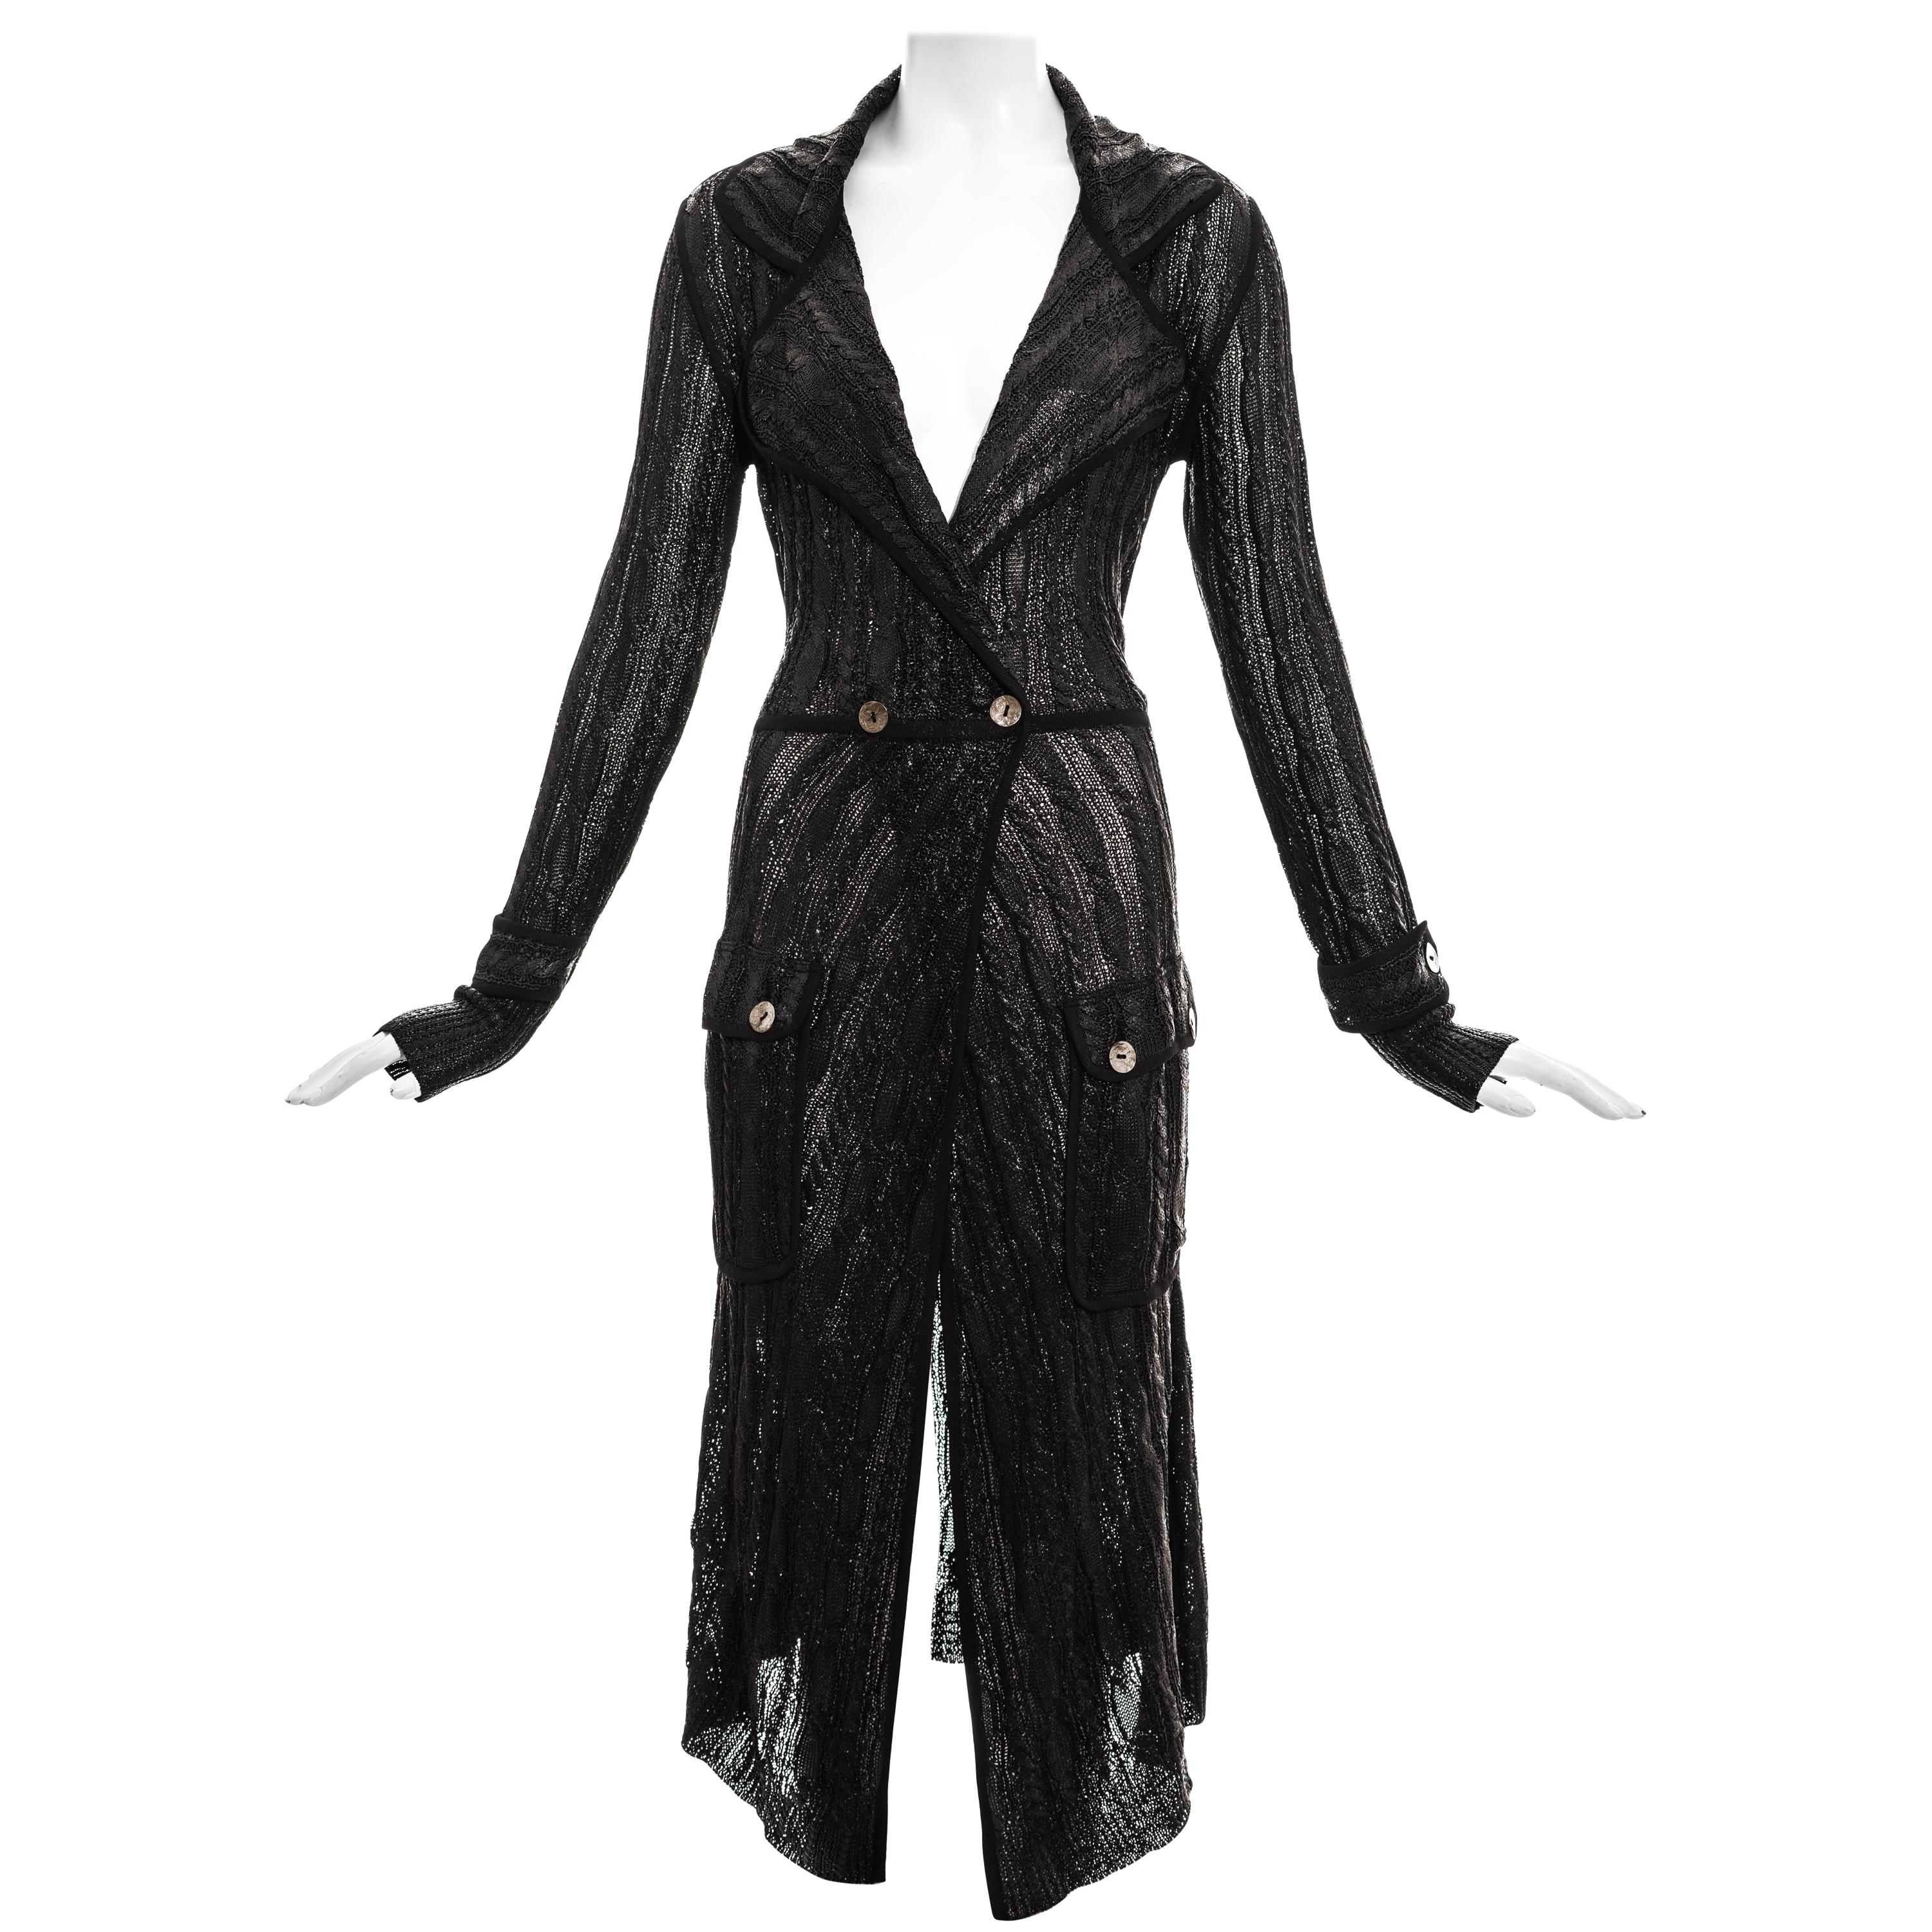 Christian Dior by John Galliano black rayon knitted evening cardigan, ss 1999